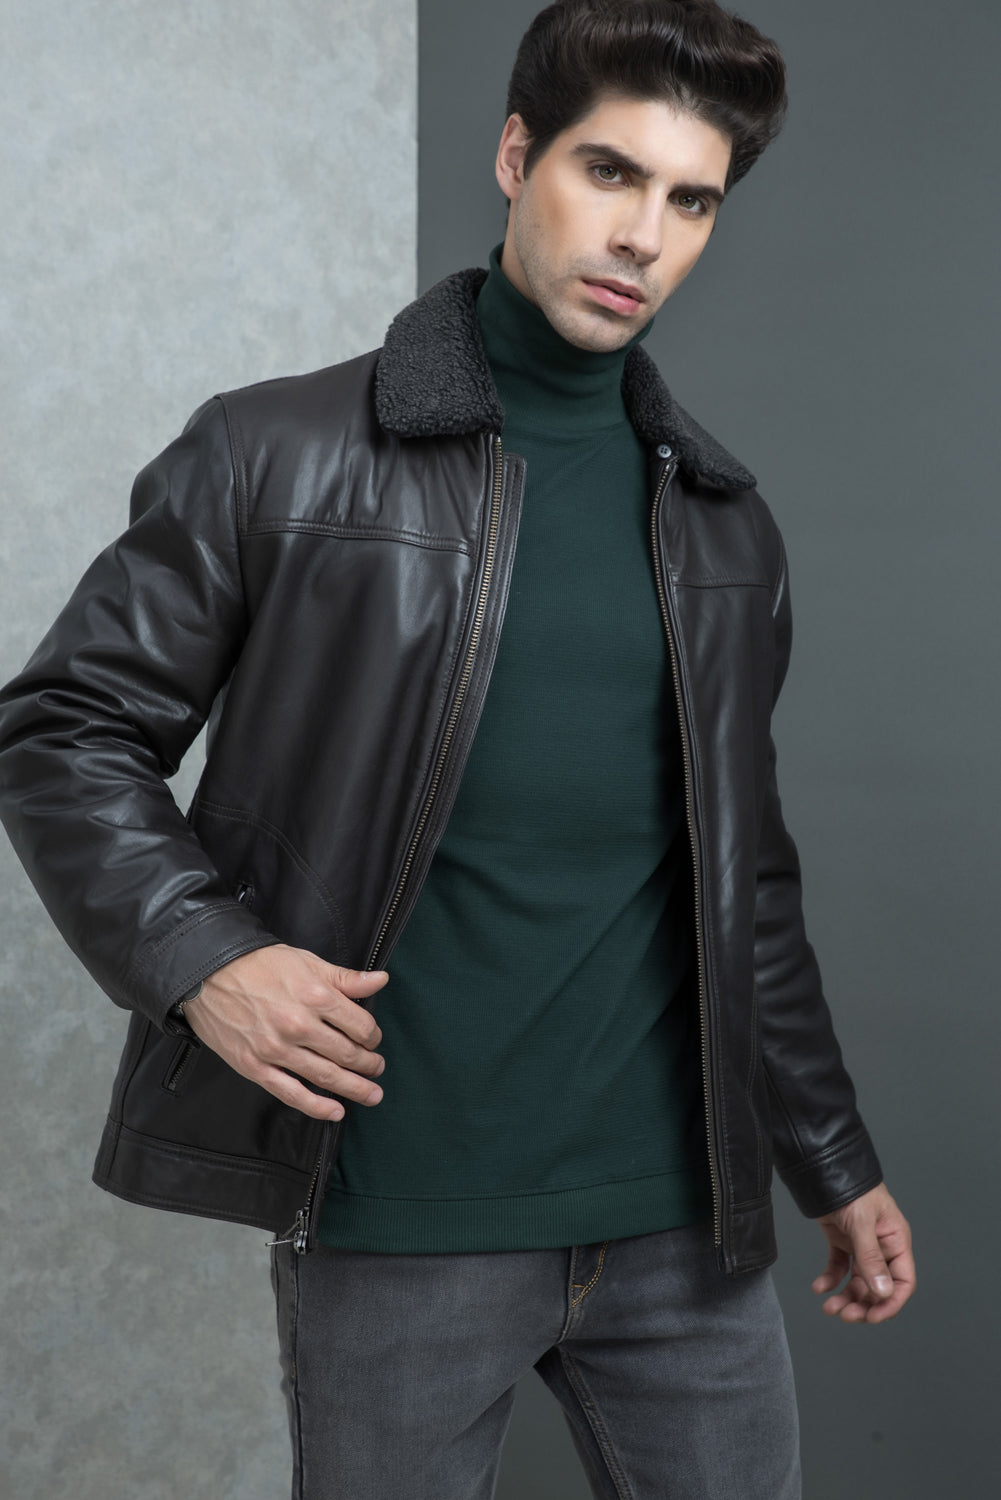 Justanned Faux Fur Leather Jacket